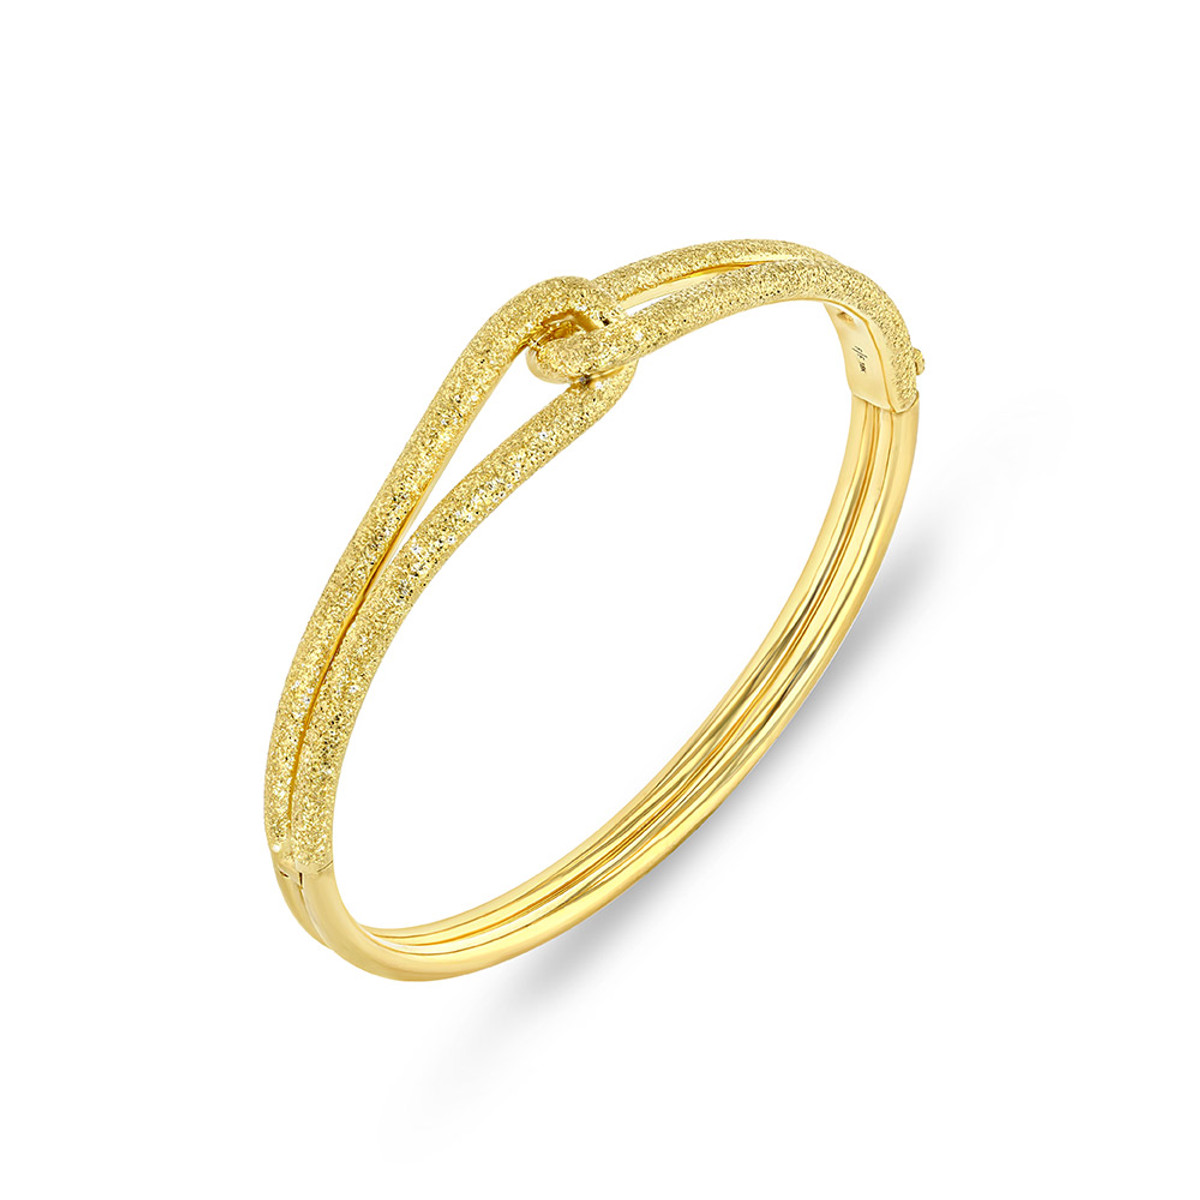 Future Fortune 18K Yellow Gold Tie The Knot Bangle-55965 Product Image